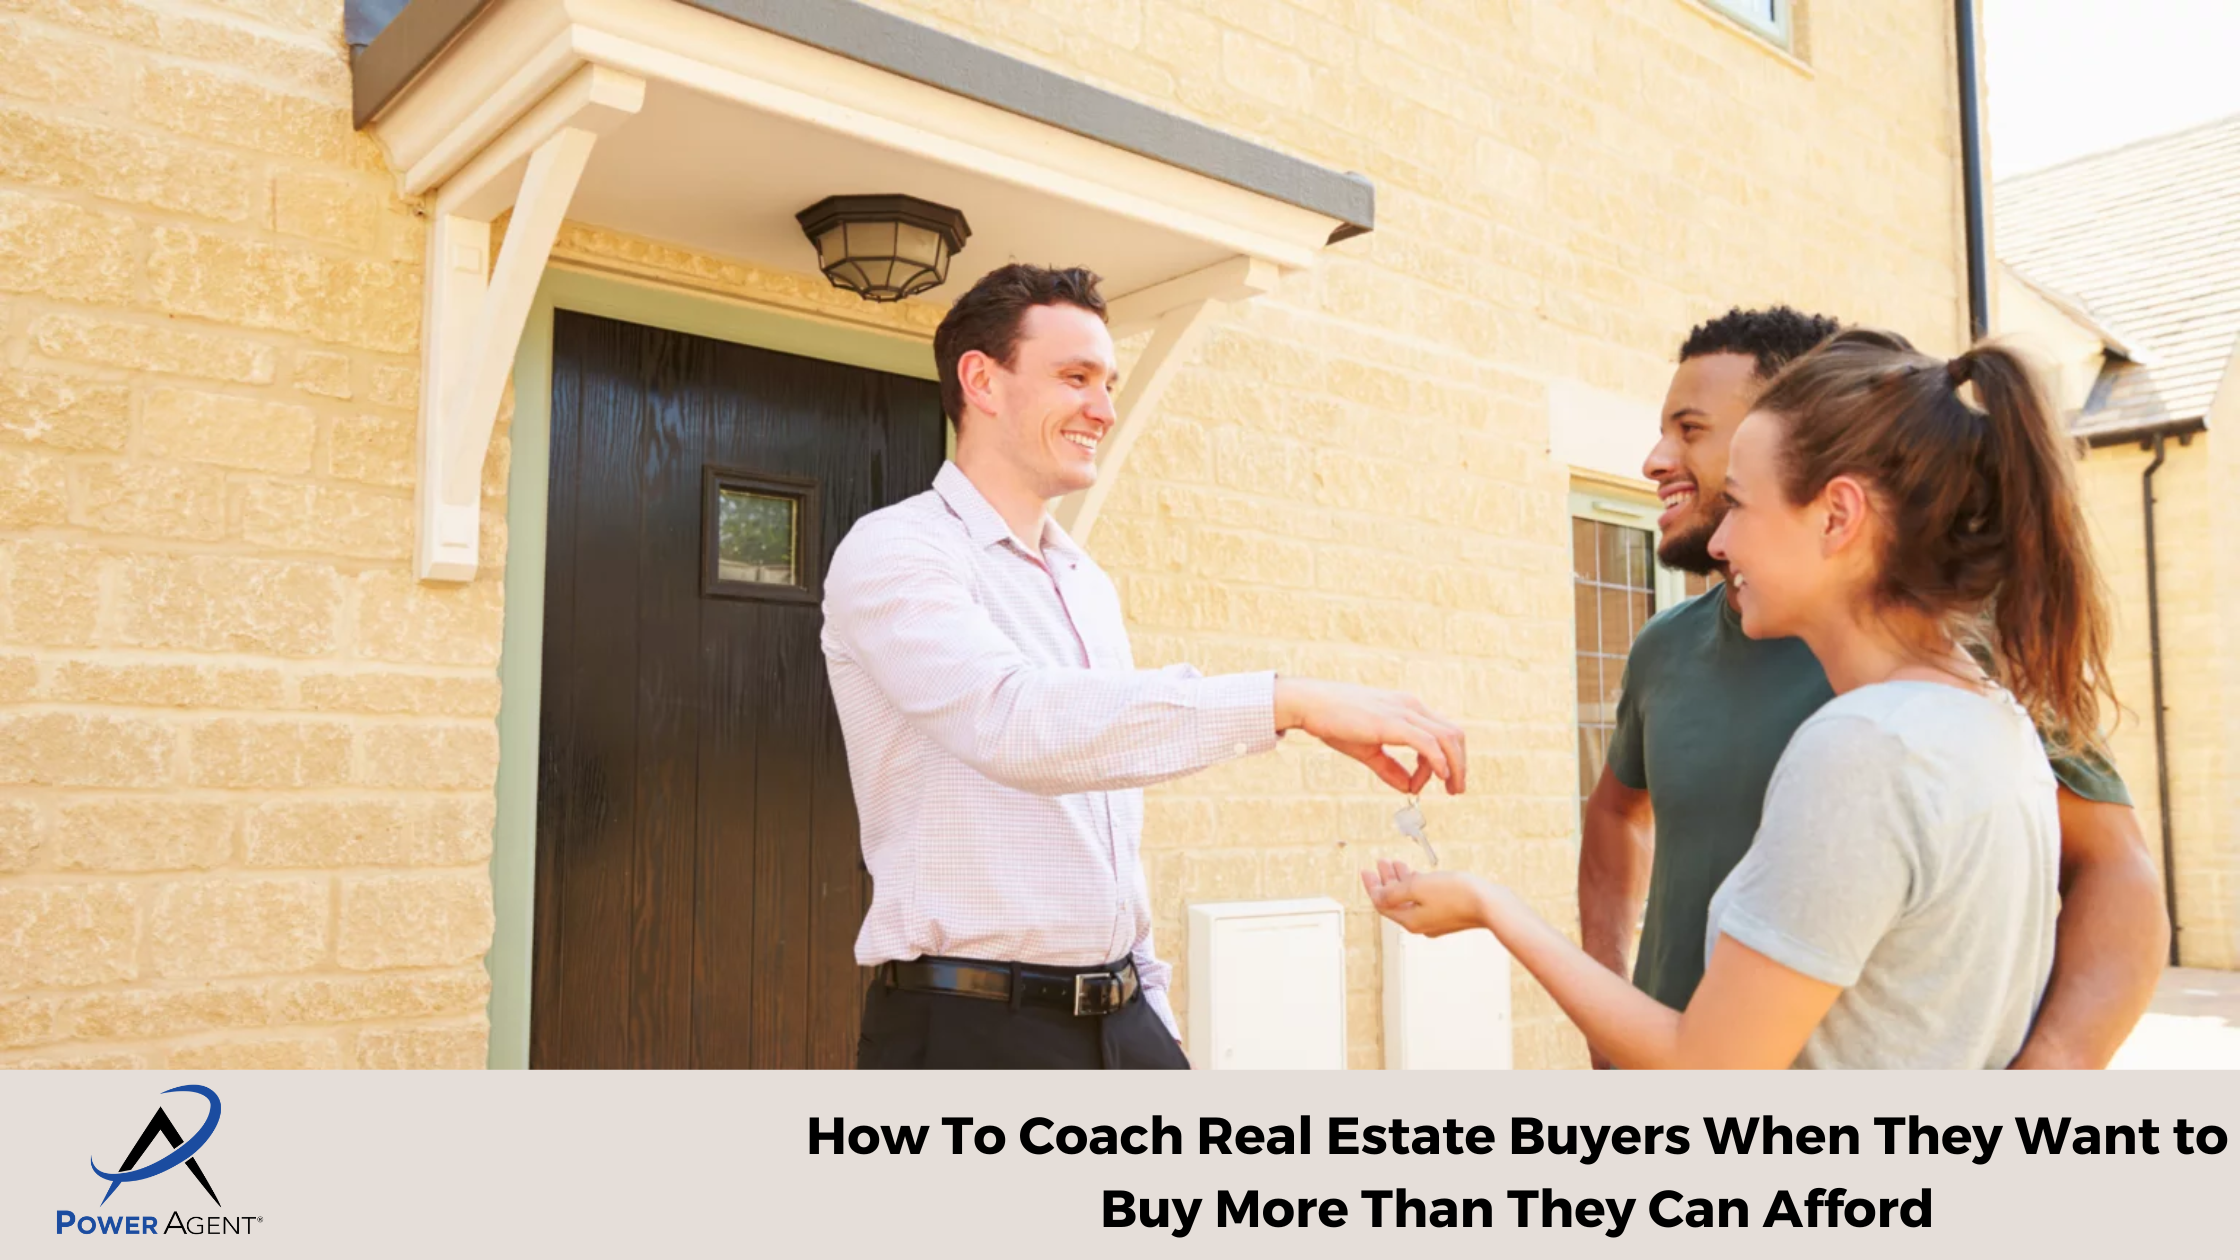 How To Coach Real Estate Buyers When They Want to Buy More Than They Can Afford